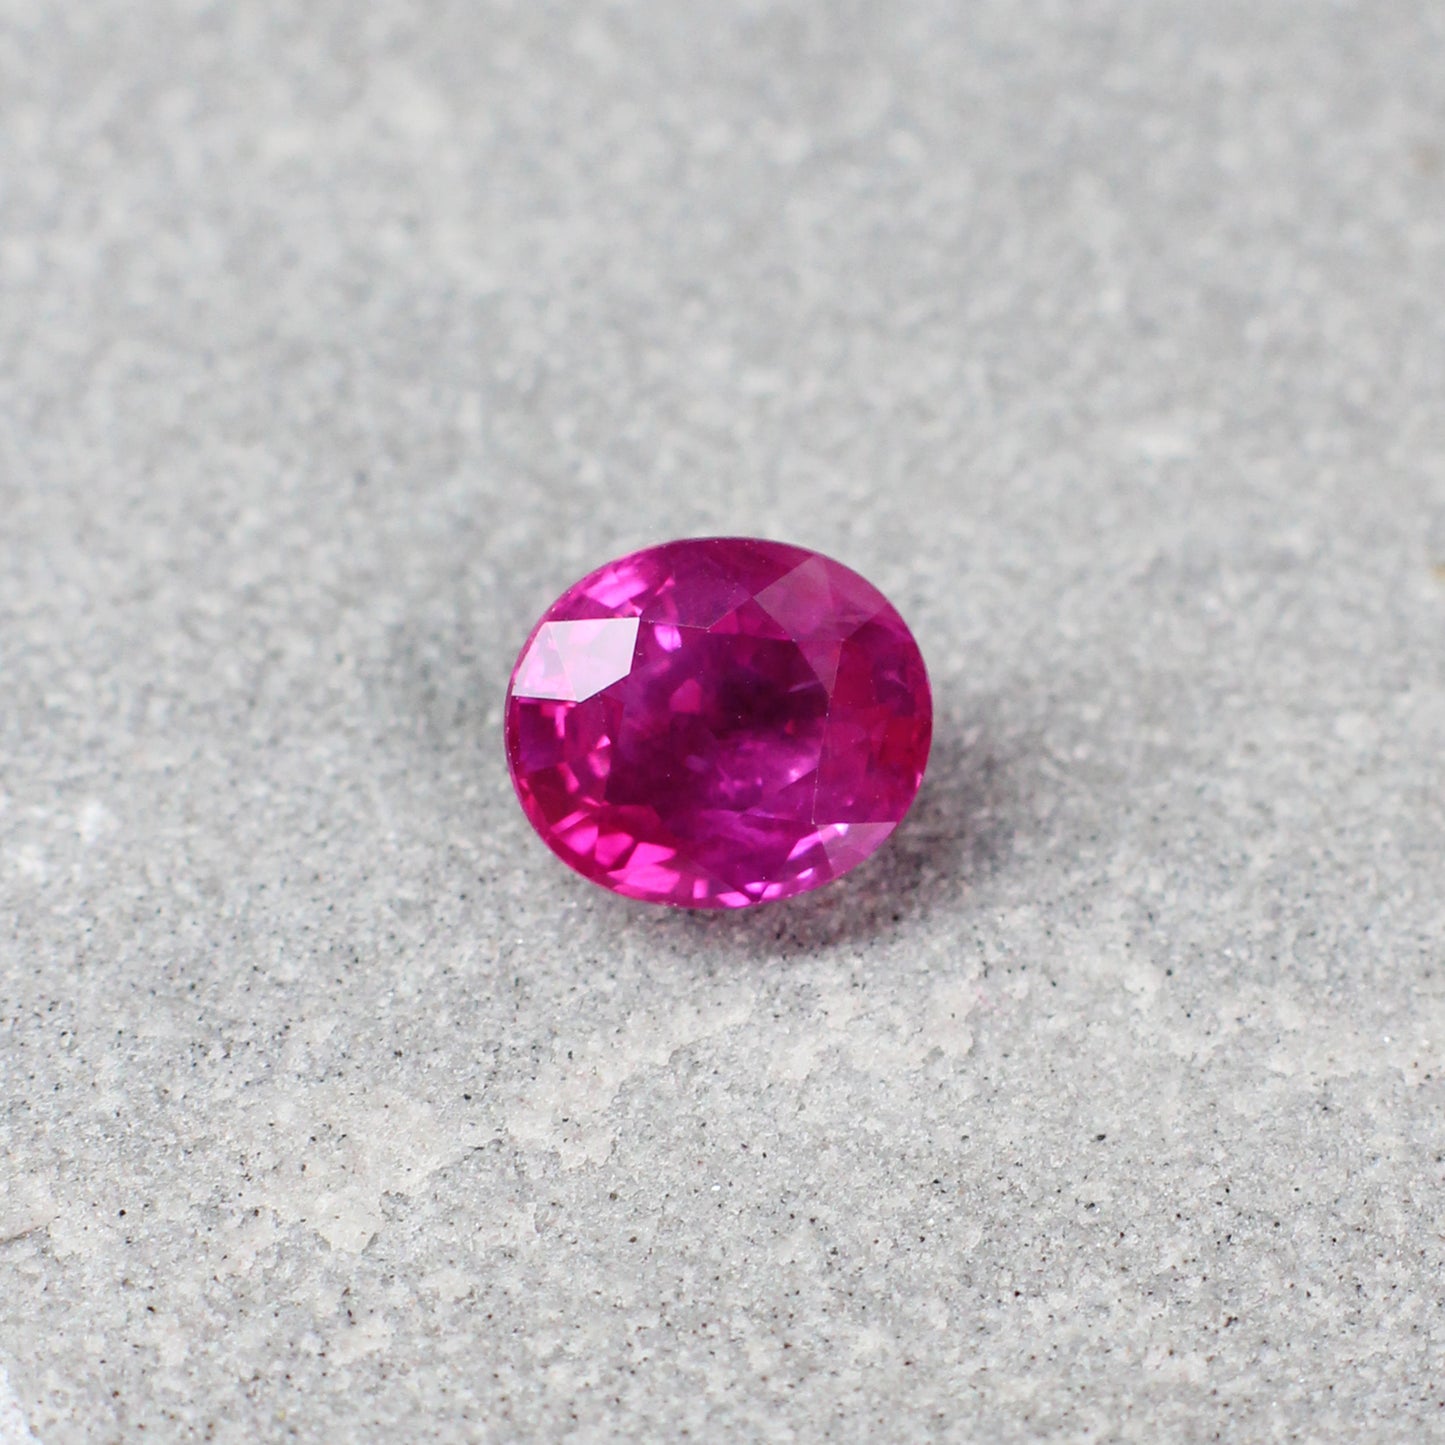 1.32ct Pinkish Red, Oval Ruby, H(a), Myanmar - 6.64 x 5.74 x 3.68mm